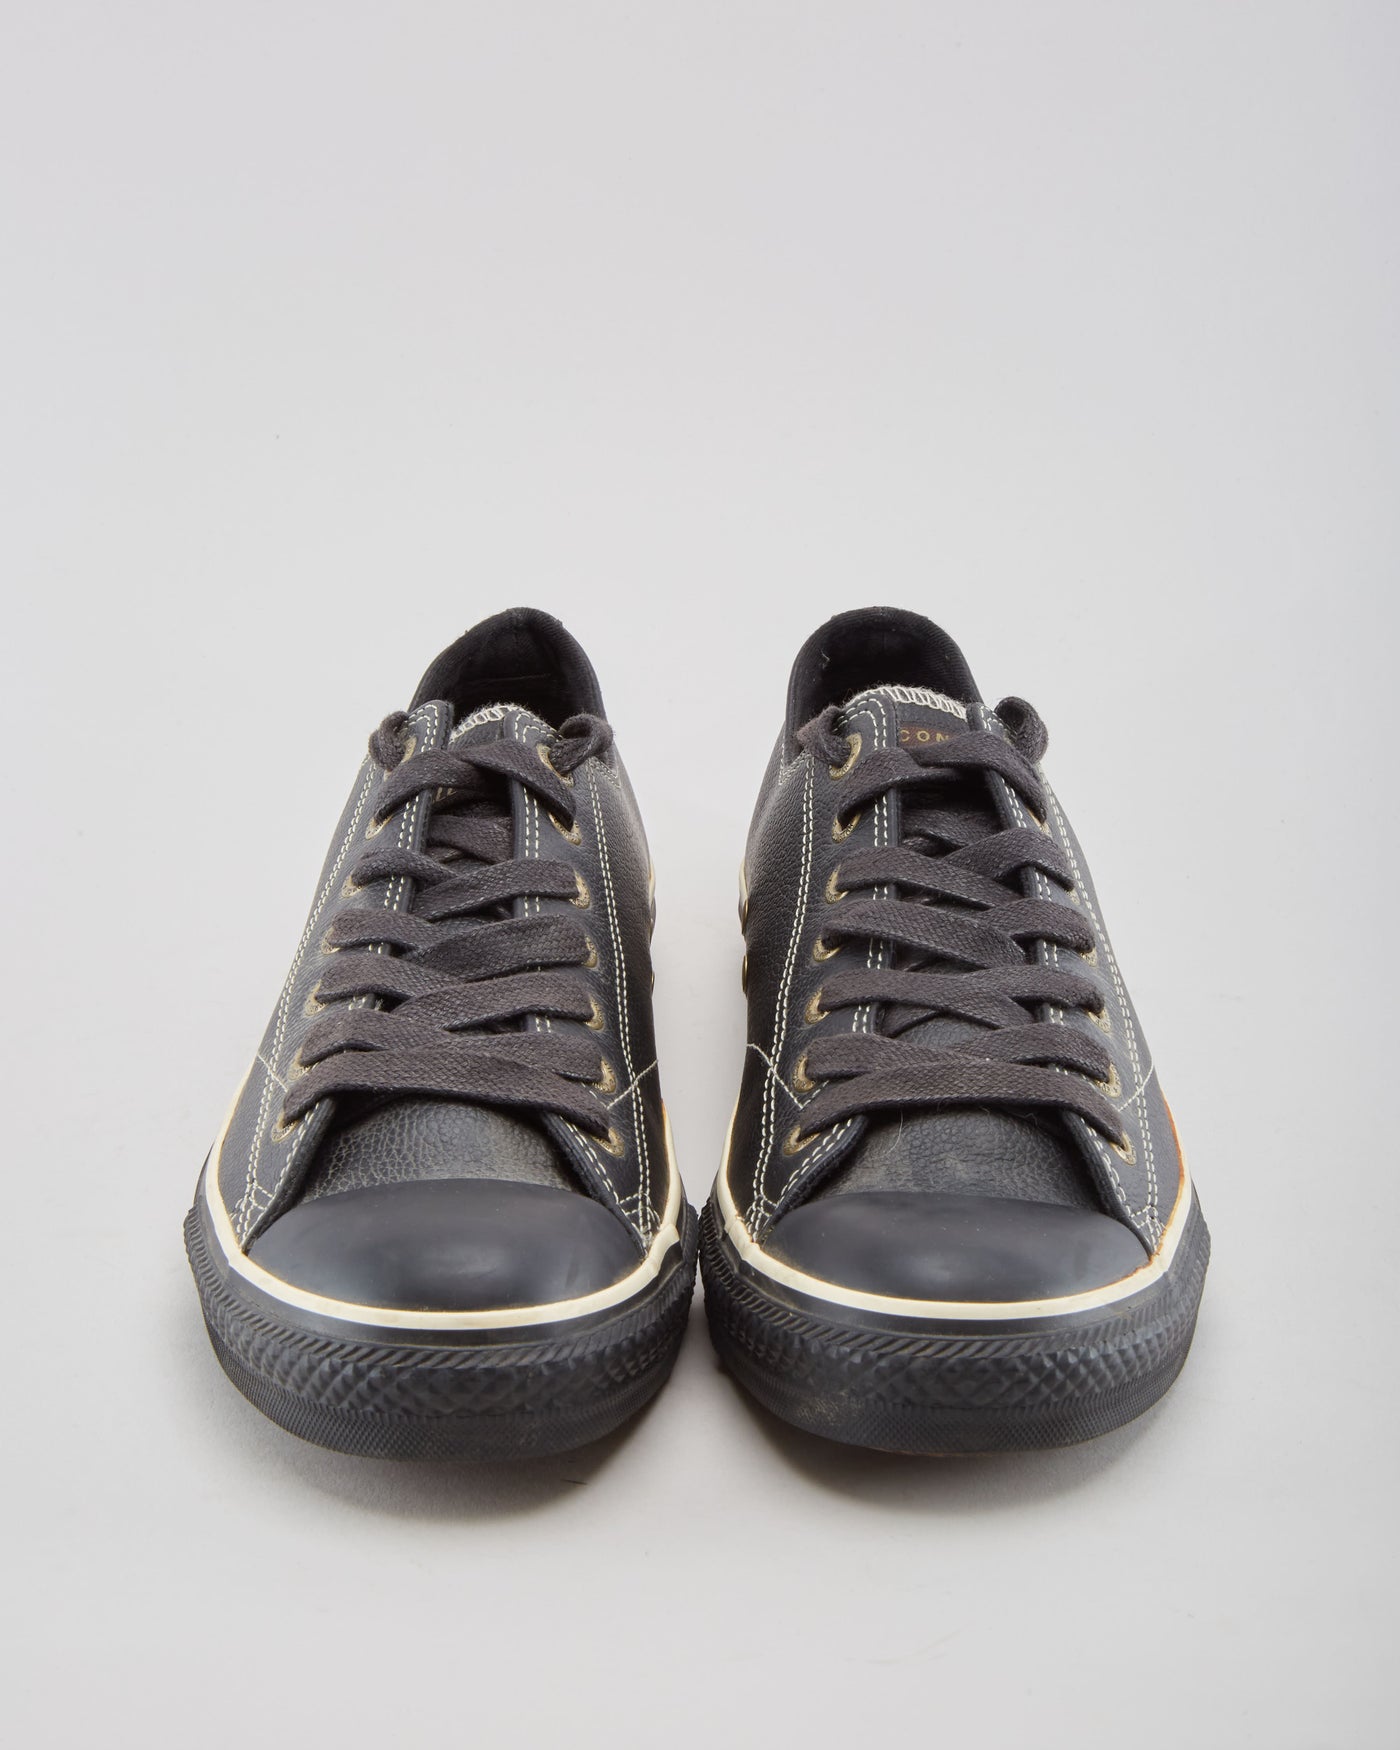 All Star Converse Black Leather - Mens UK 9